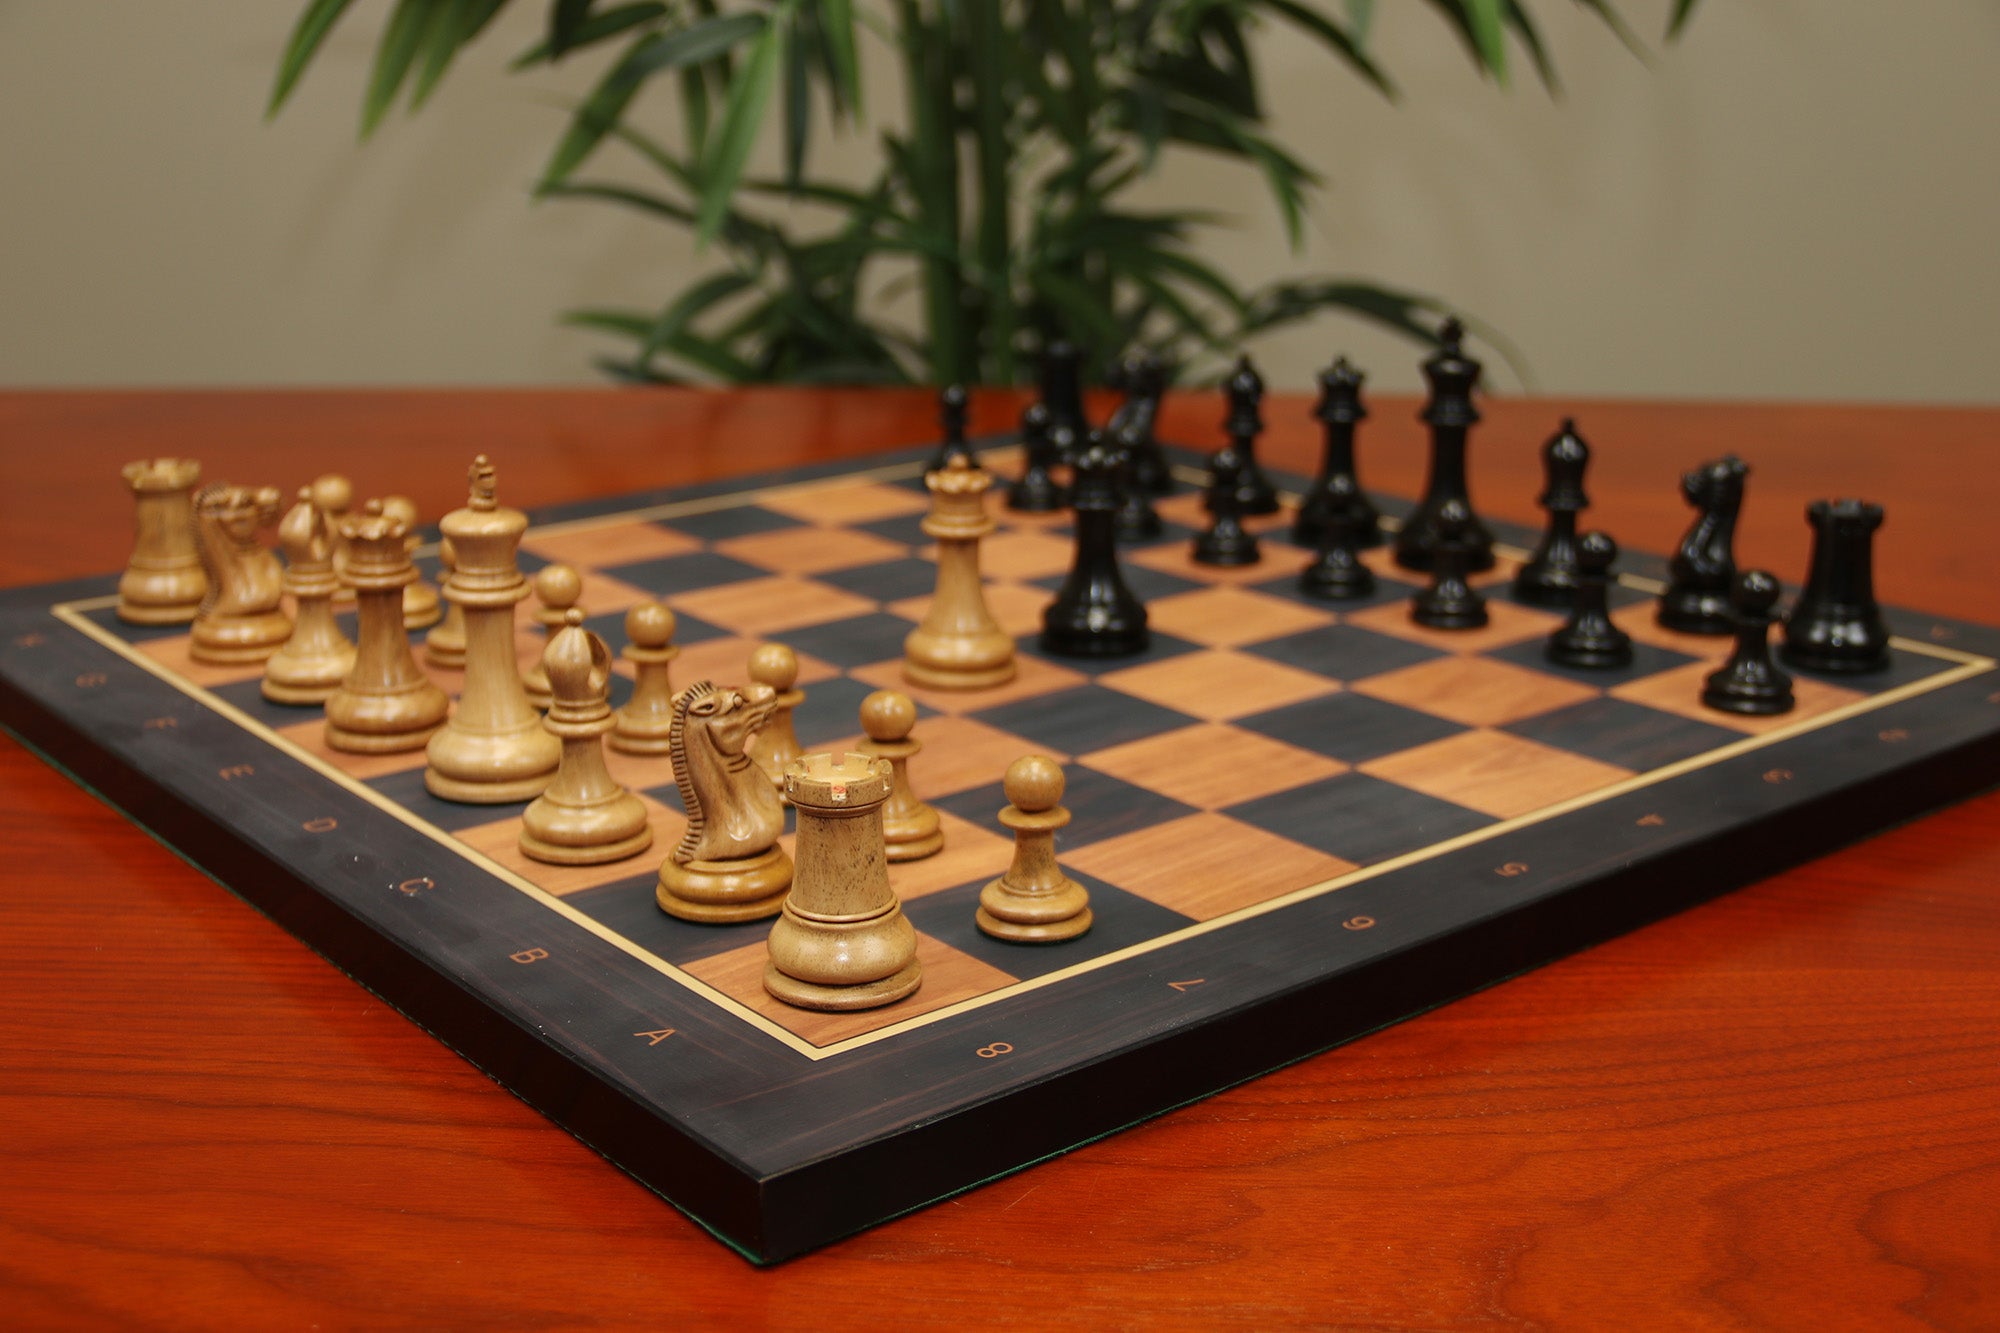 Nathaniel 1849 Antique Reproduction Vintage 3.75" Chess Set in Ebony/ Distressed Boxwood